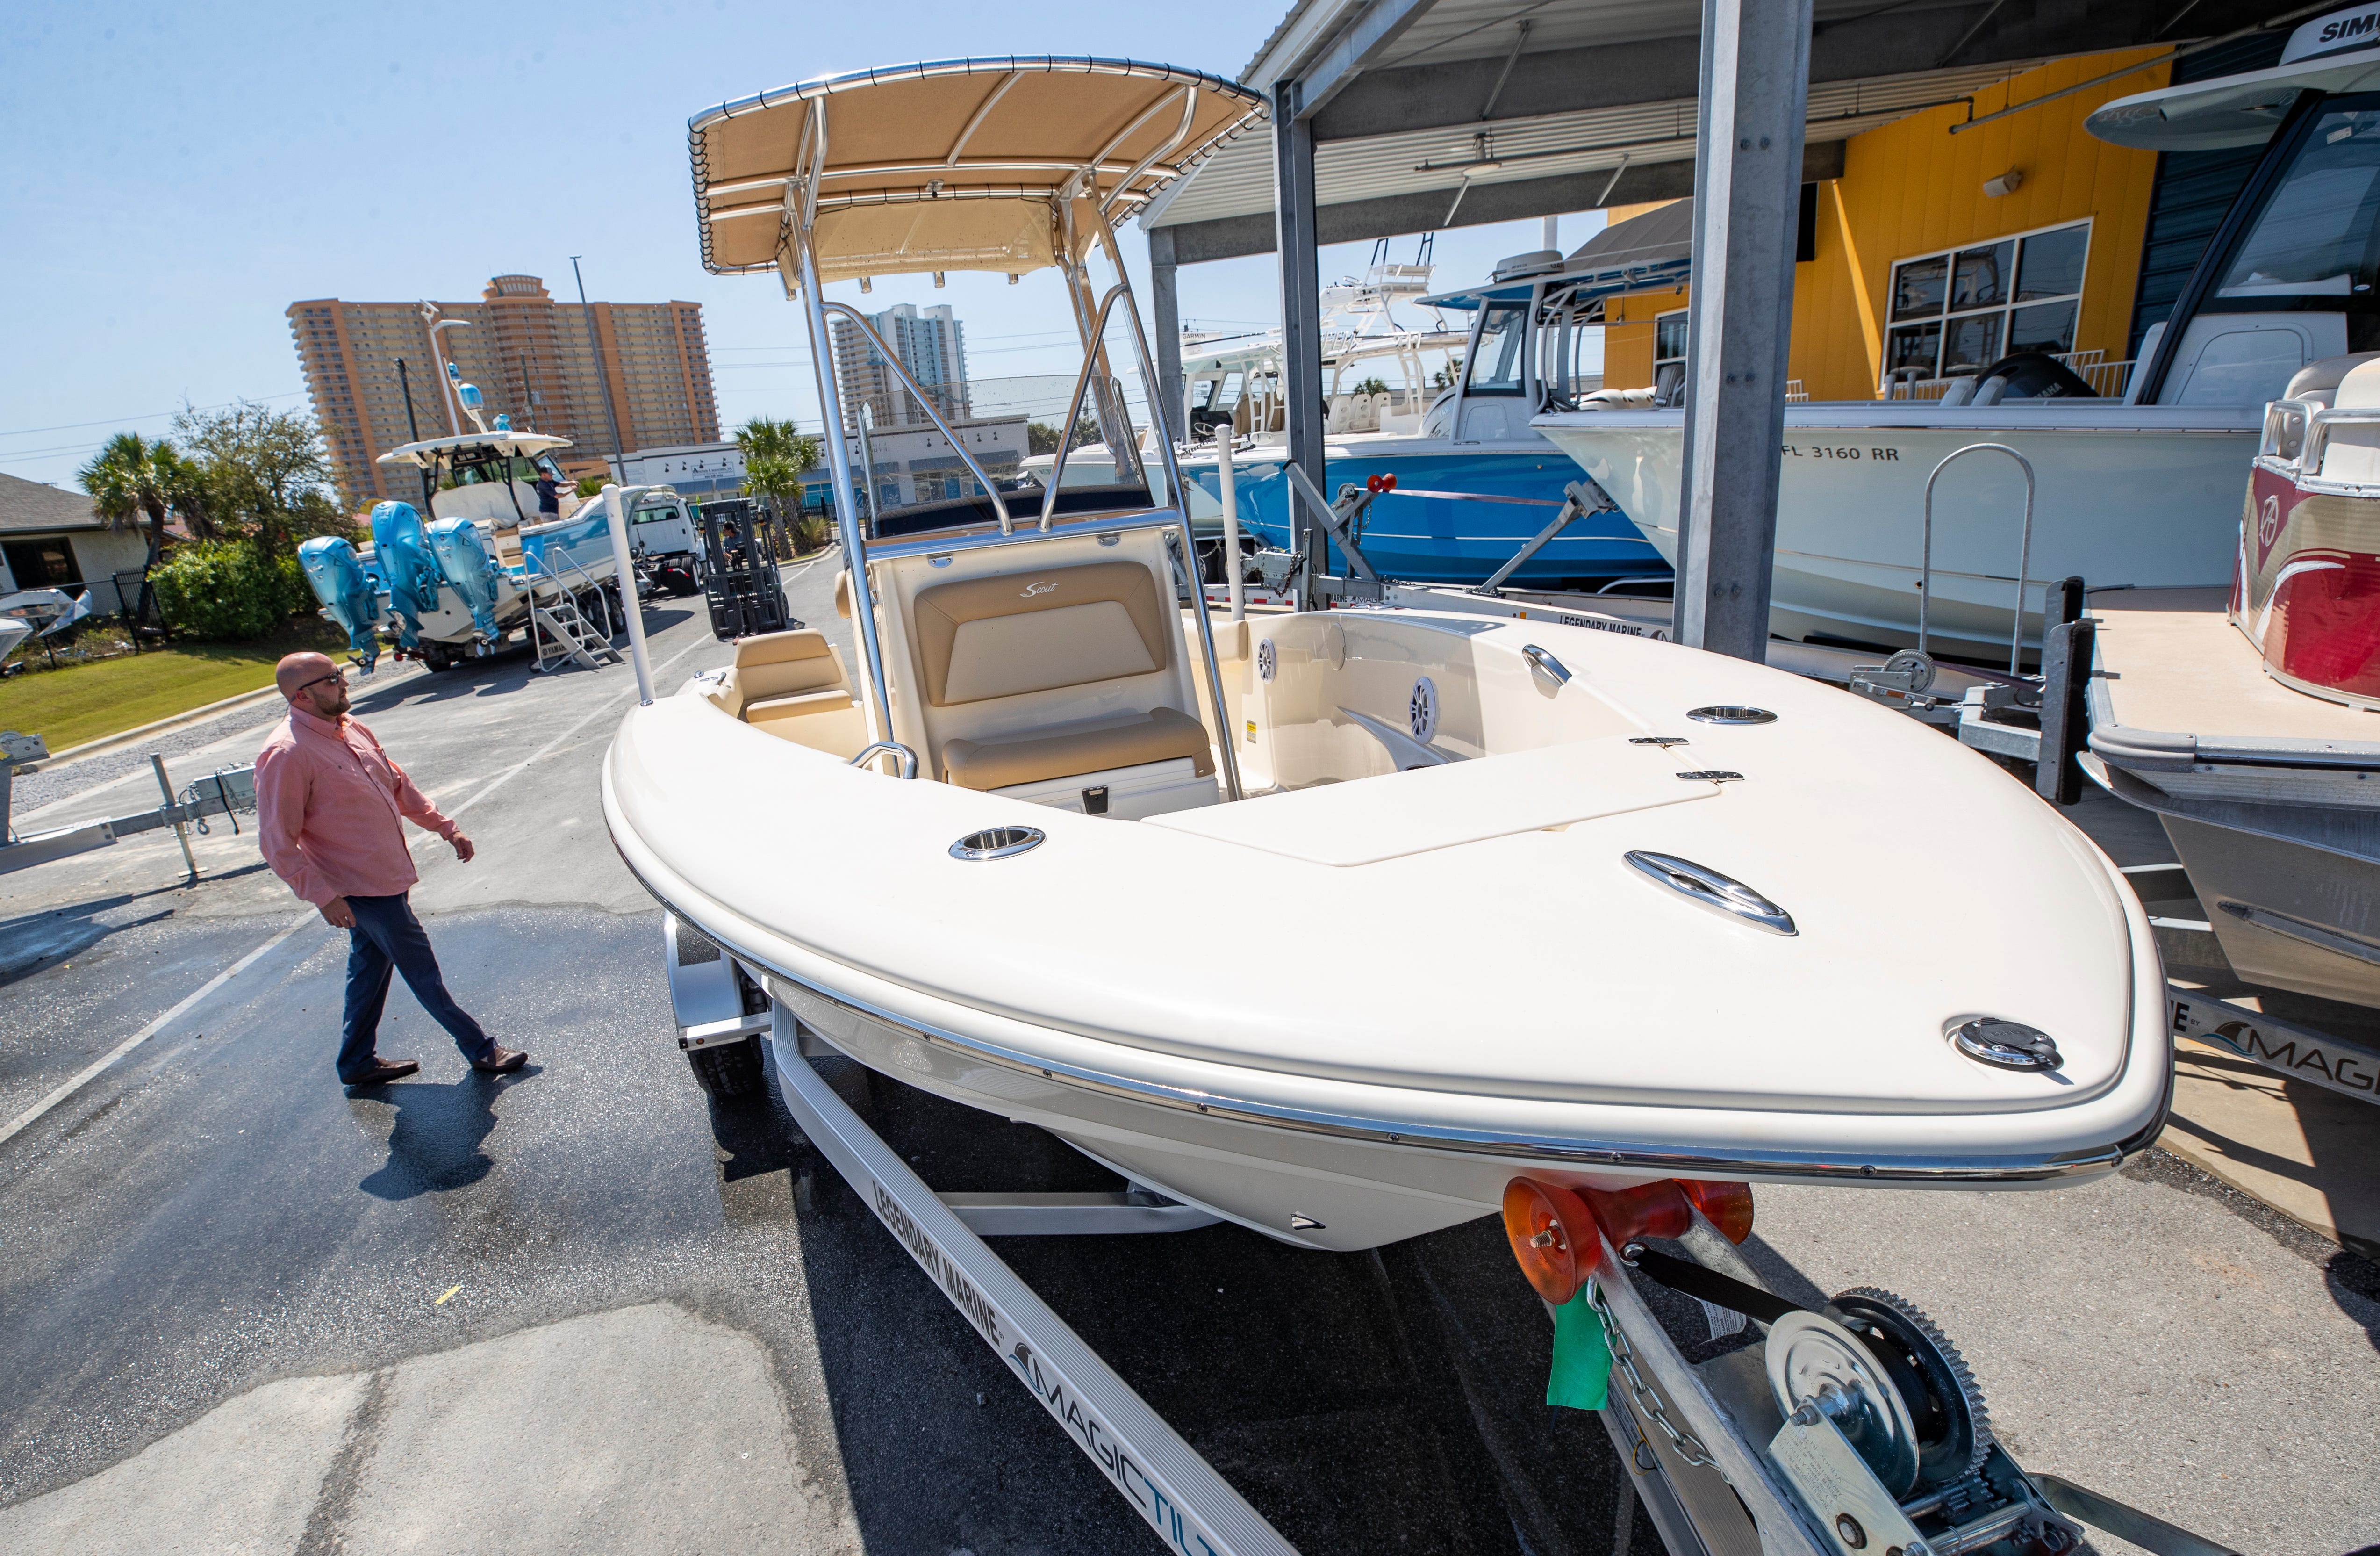 Panama City Florida Boat Ownership Is Expanding But So Are Rentals